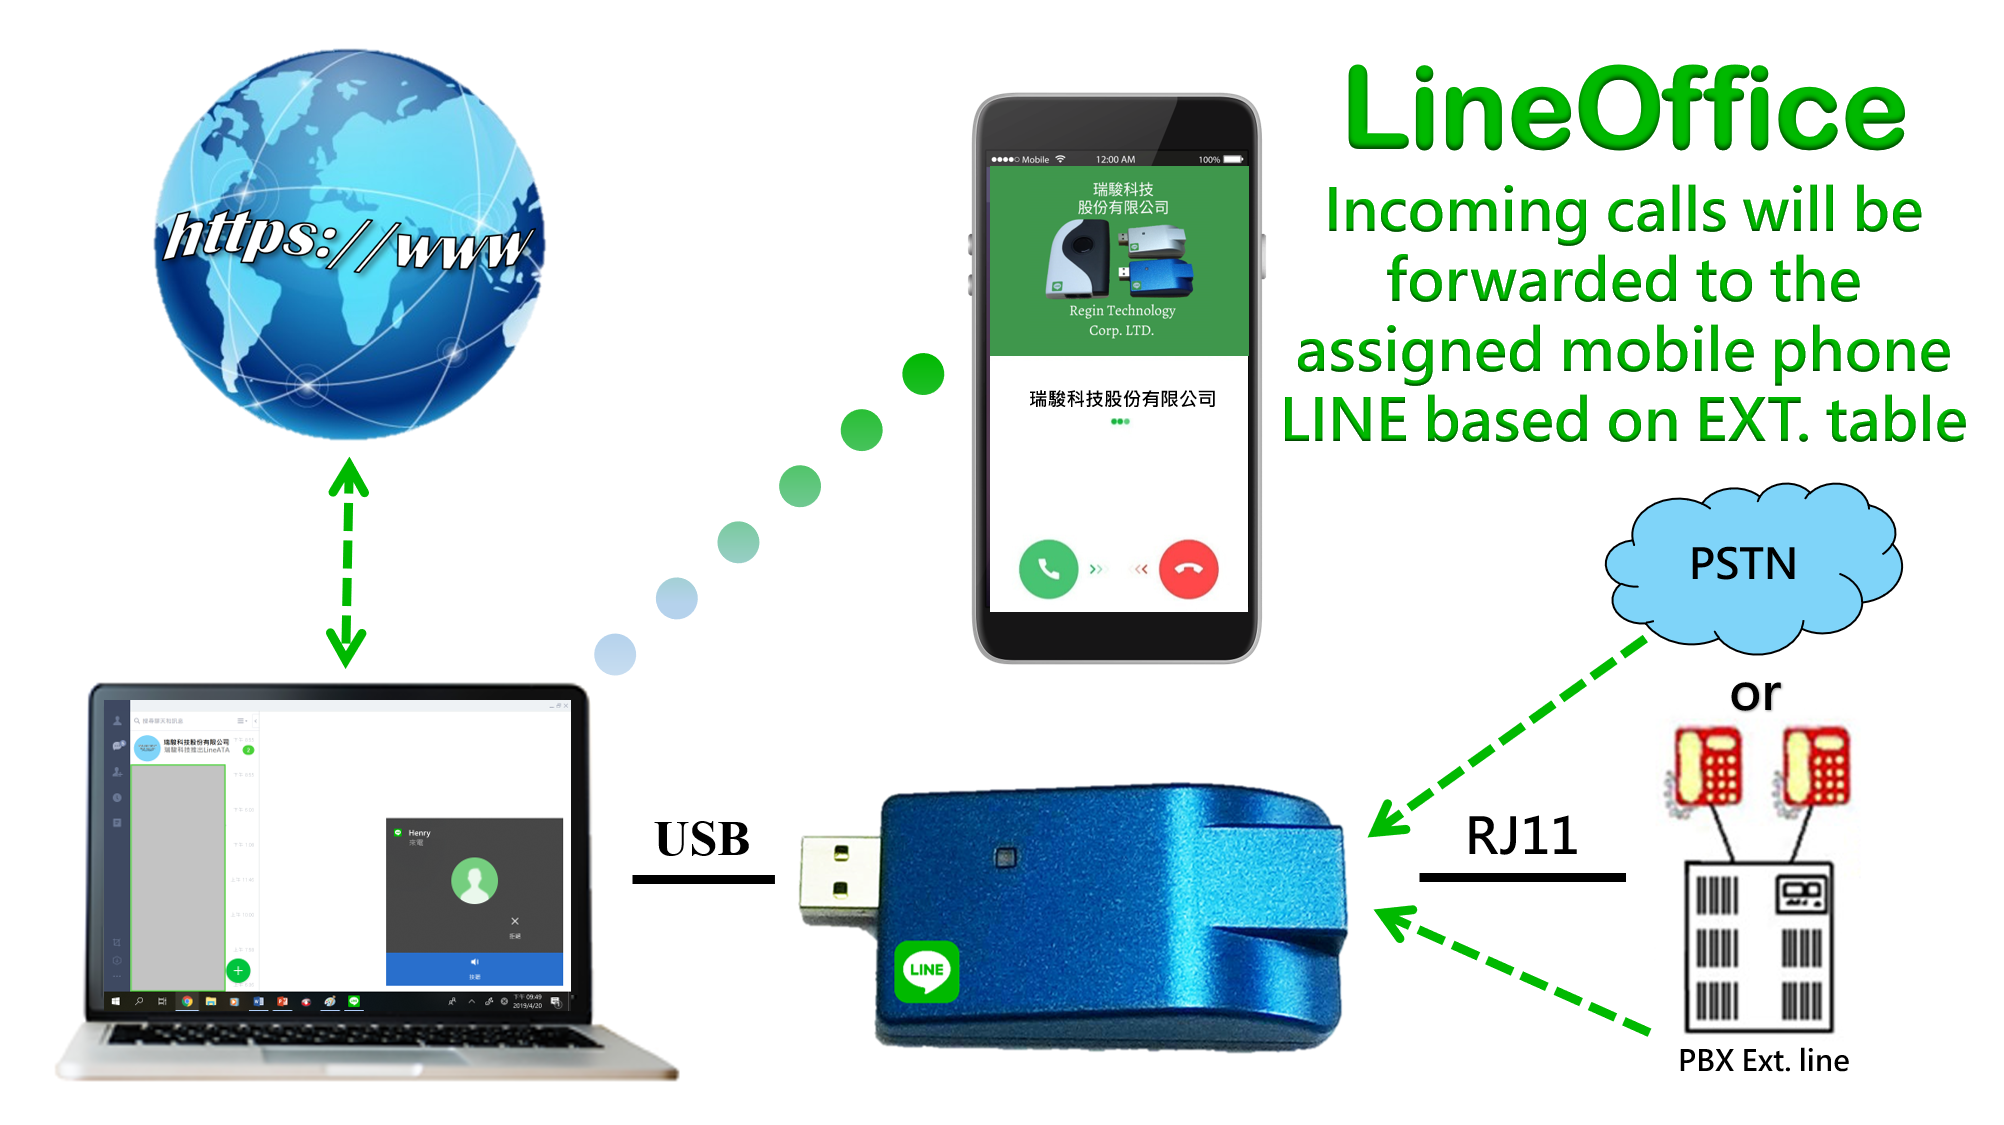 LineOffice - Serve as PBX when LineOffice is set at PBX mode